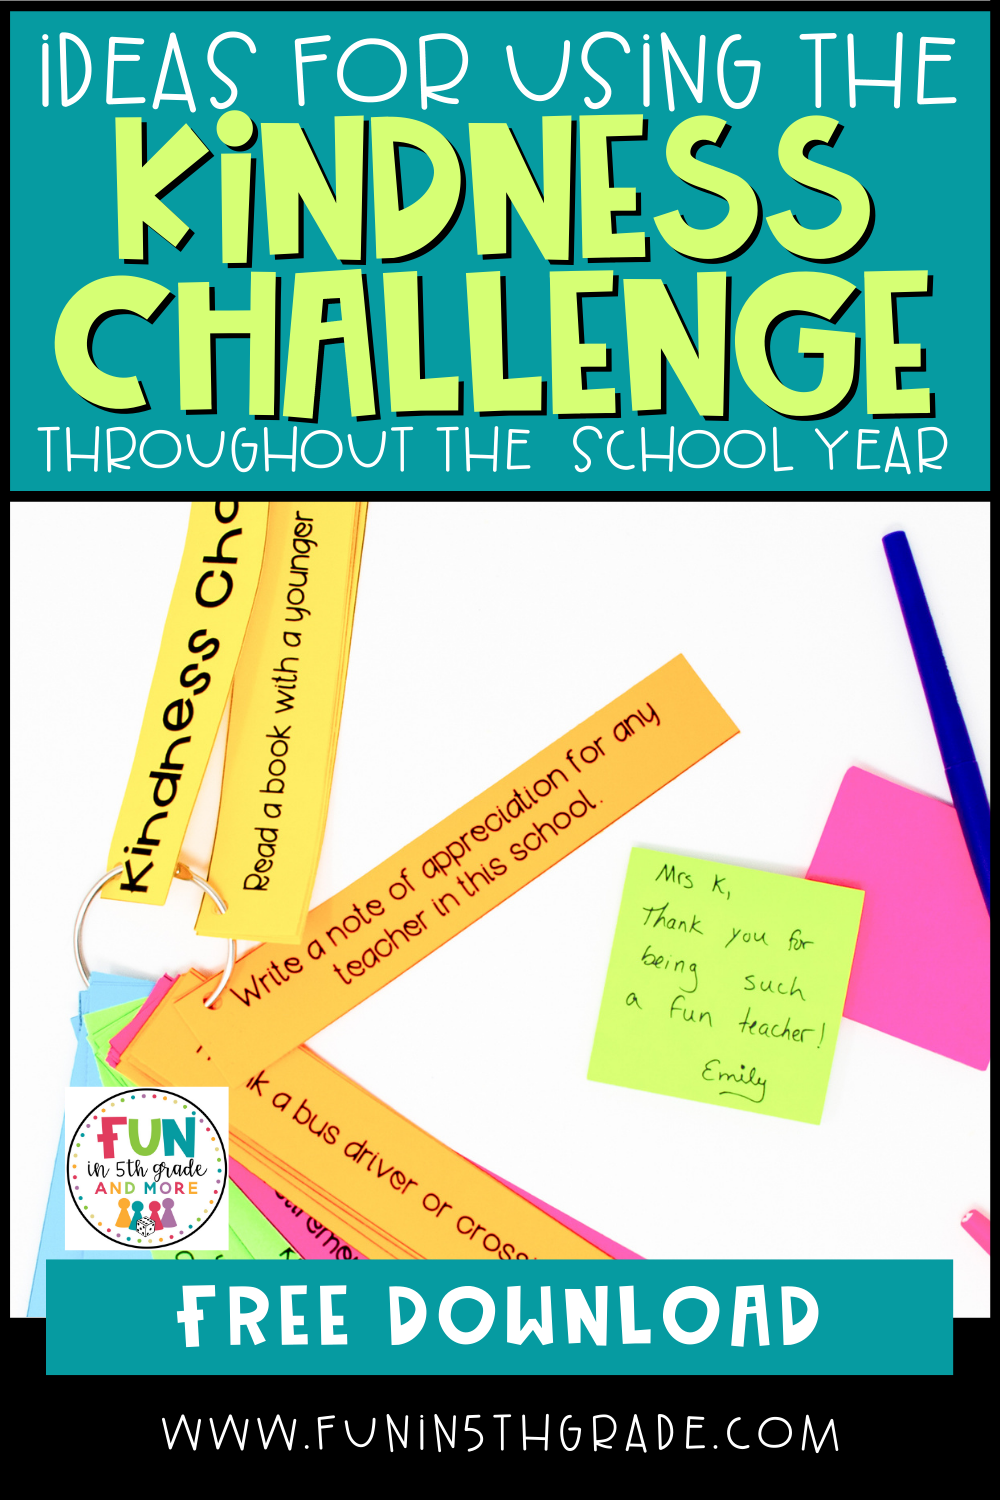 Ideas for using the kindness challenge throughout the year Pinterest image